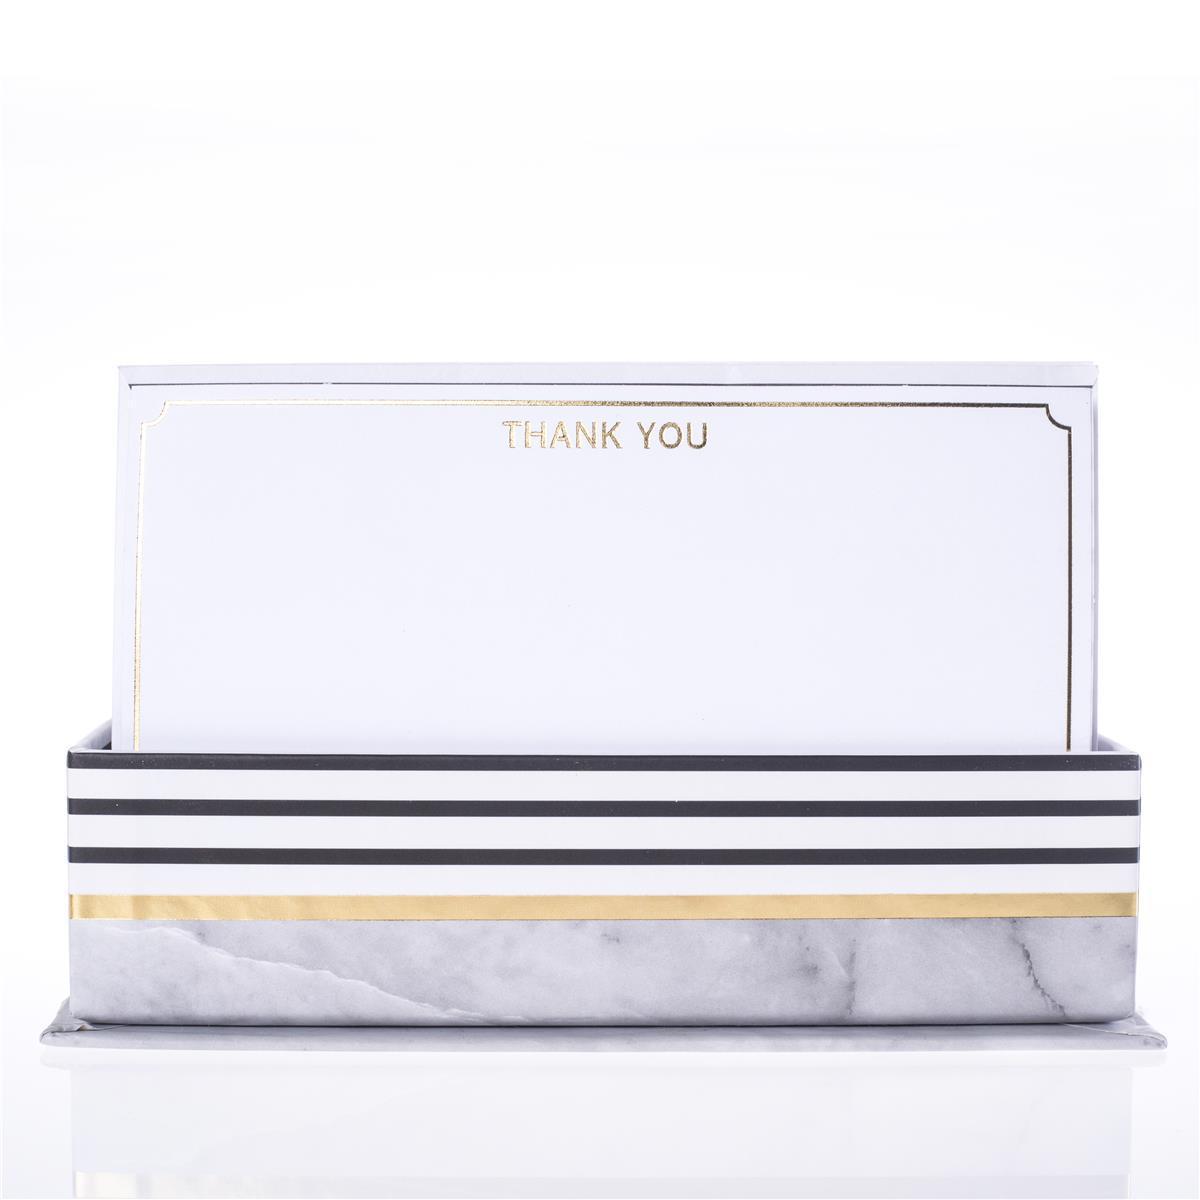 Graphique Grey Granite "Thank You" Note Card Set